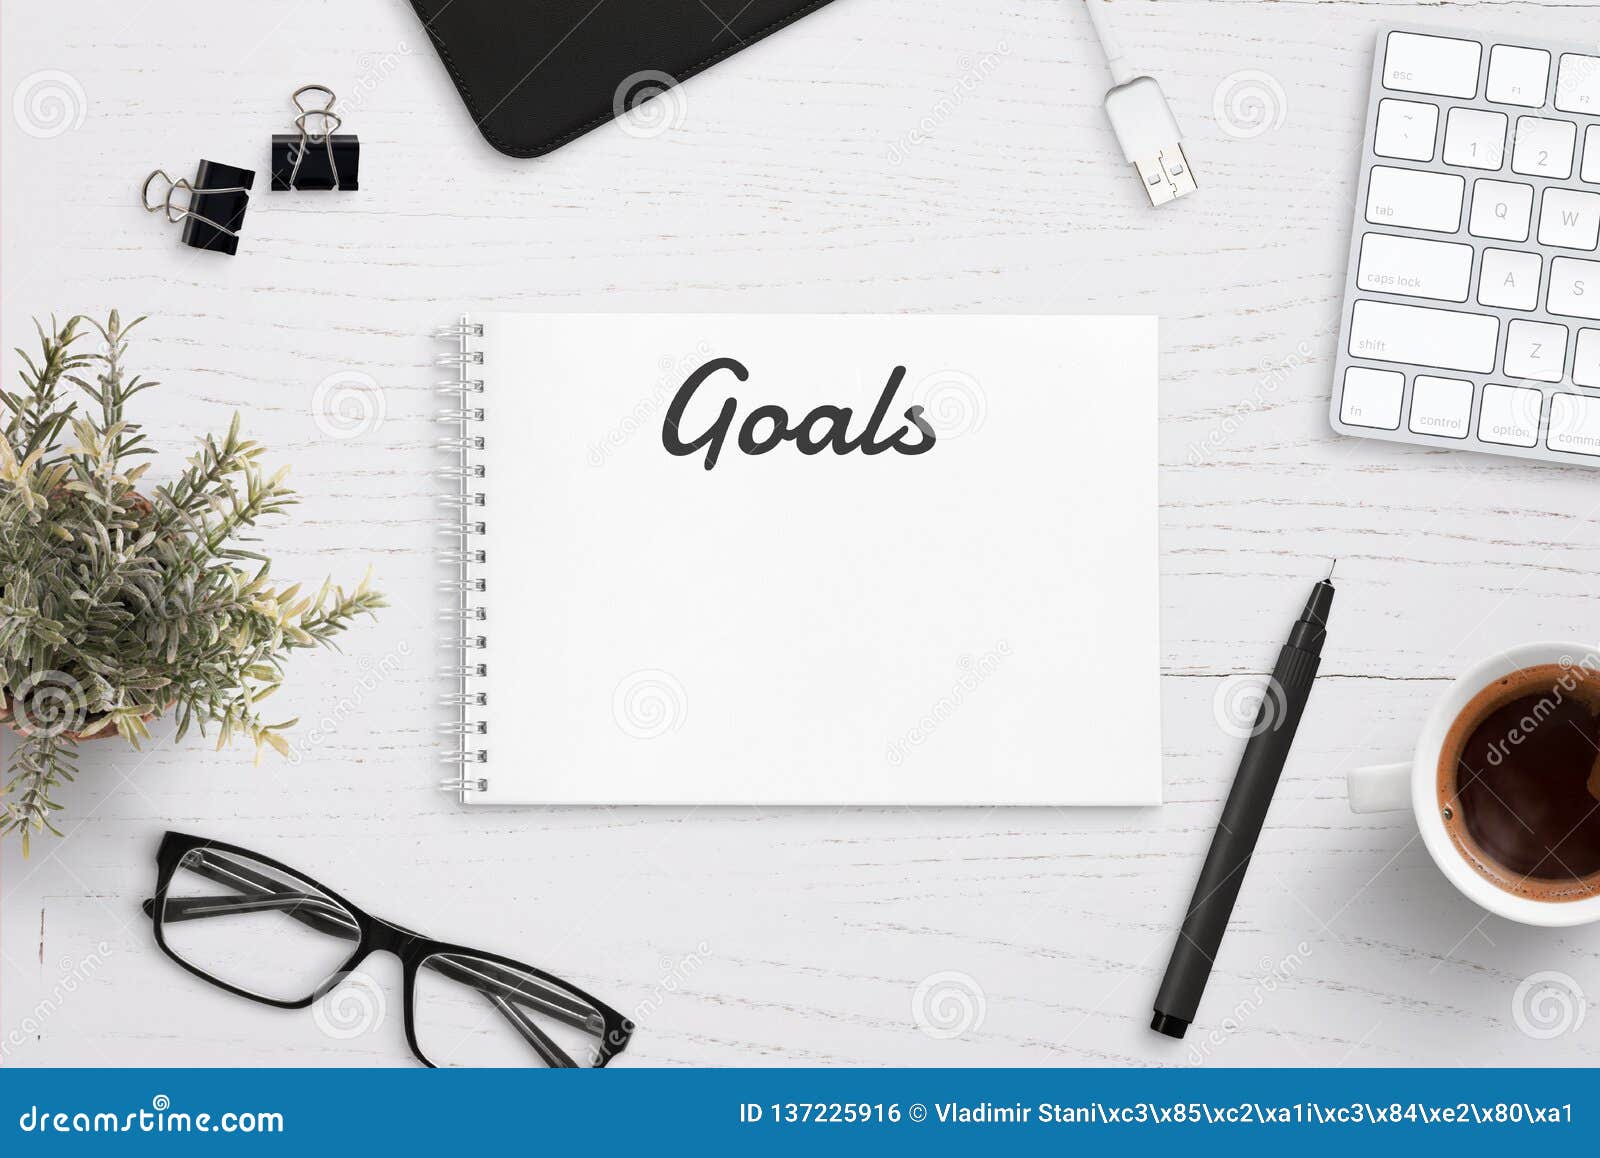 Creating Goals List On Notepad On Office Desk Surrounded With